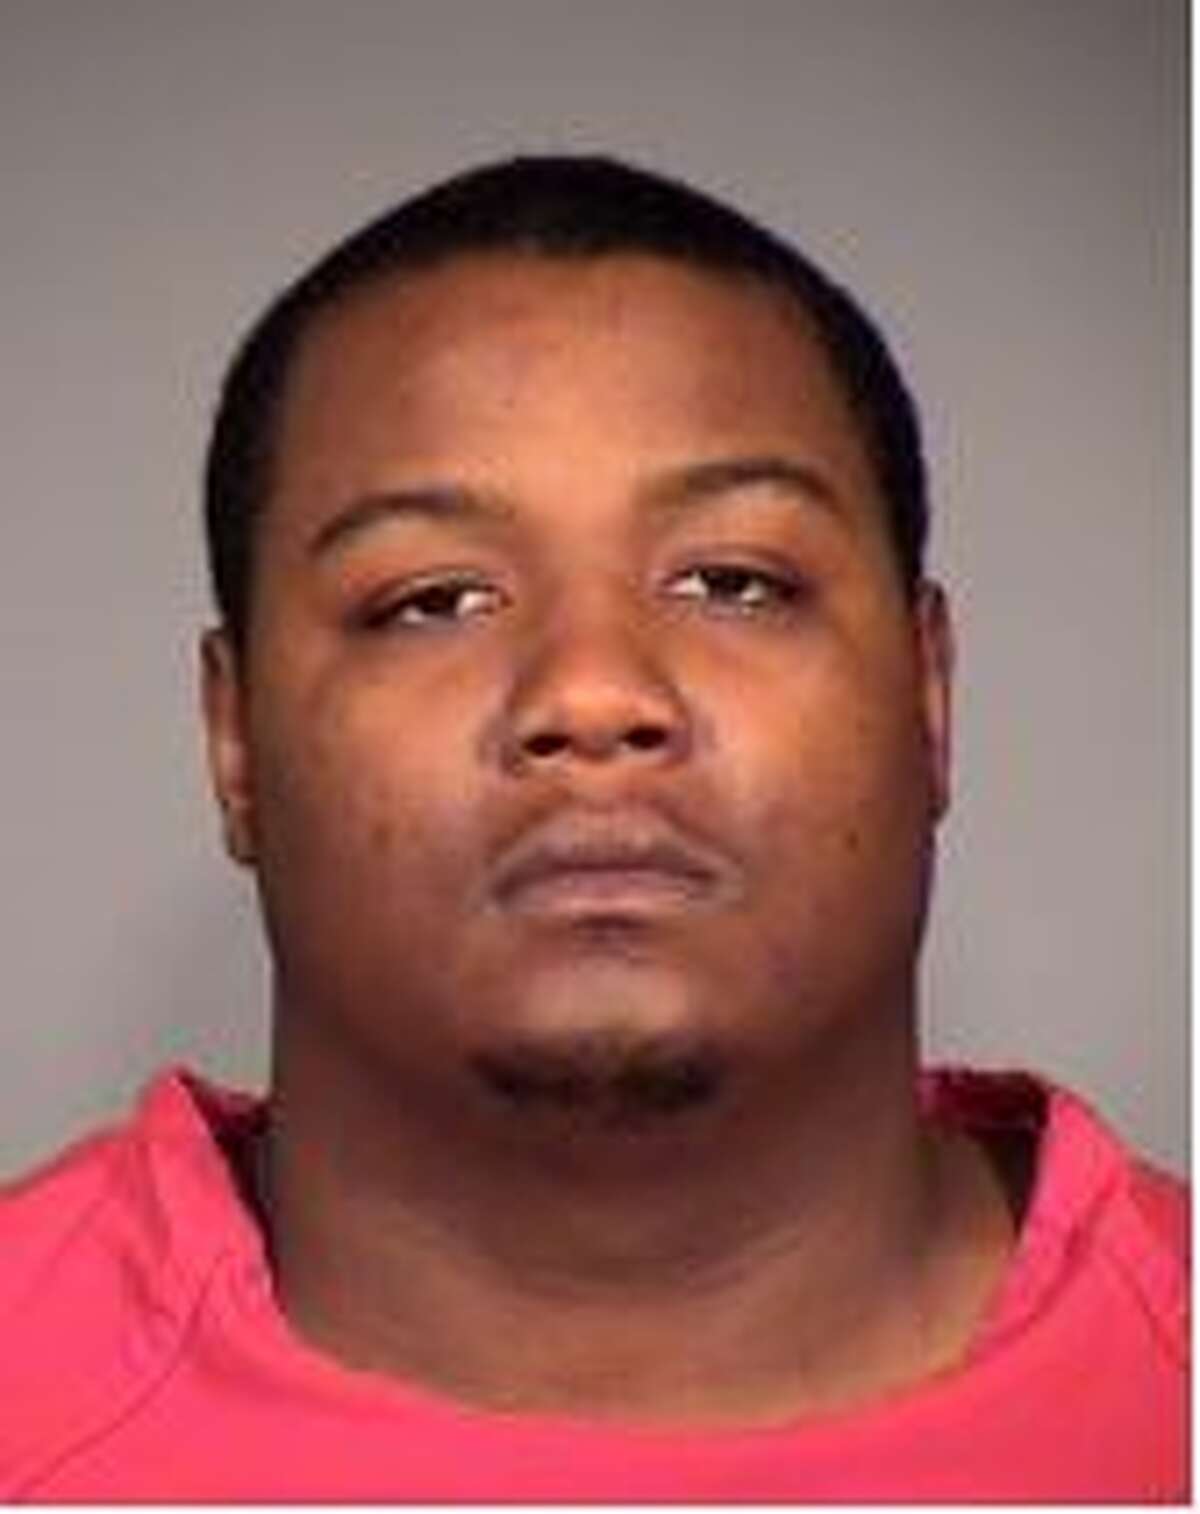 Seattle detectives are looking for Nyagah “Big-Baby” Baker-Williams, a 27-year-old man known to frequent Belltown and downtown Seattle. He is wanted in connection with the Nov. 2 shooting, which saw Shon Tiea Brister, 31, and Raymond Myles, Jr., 39, killed.